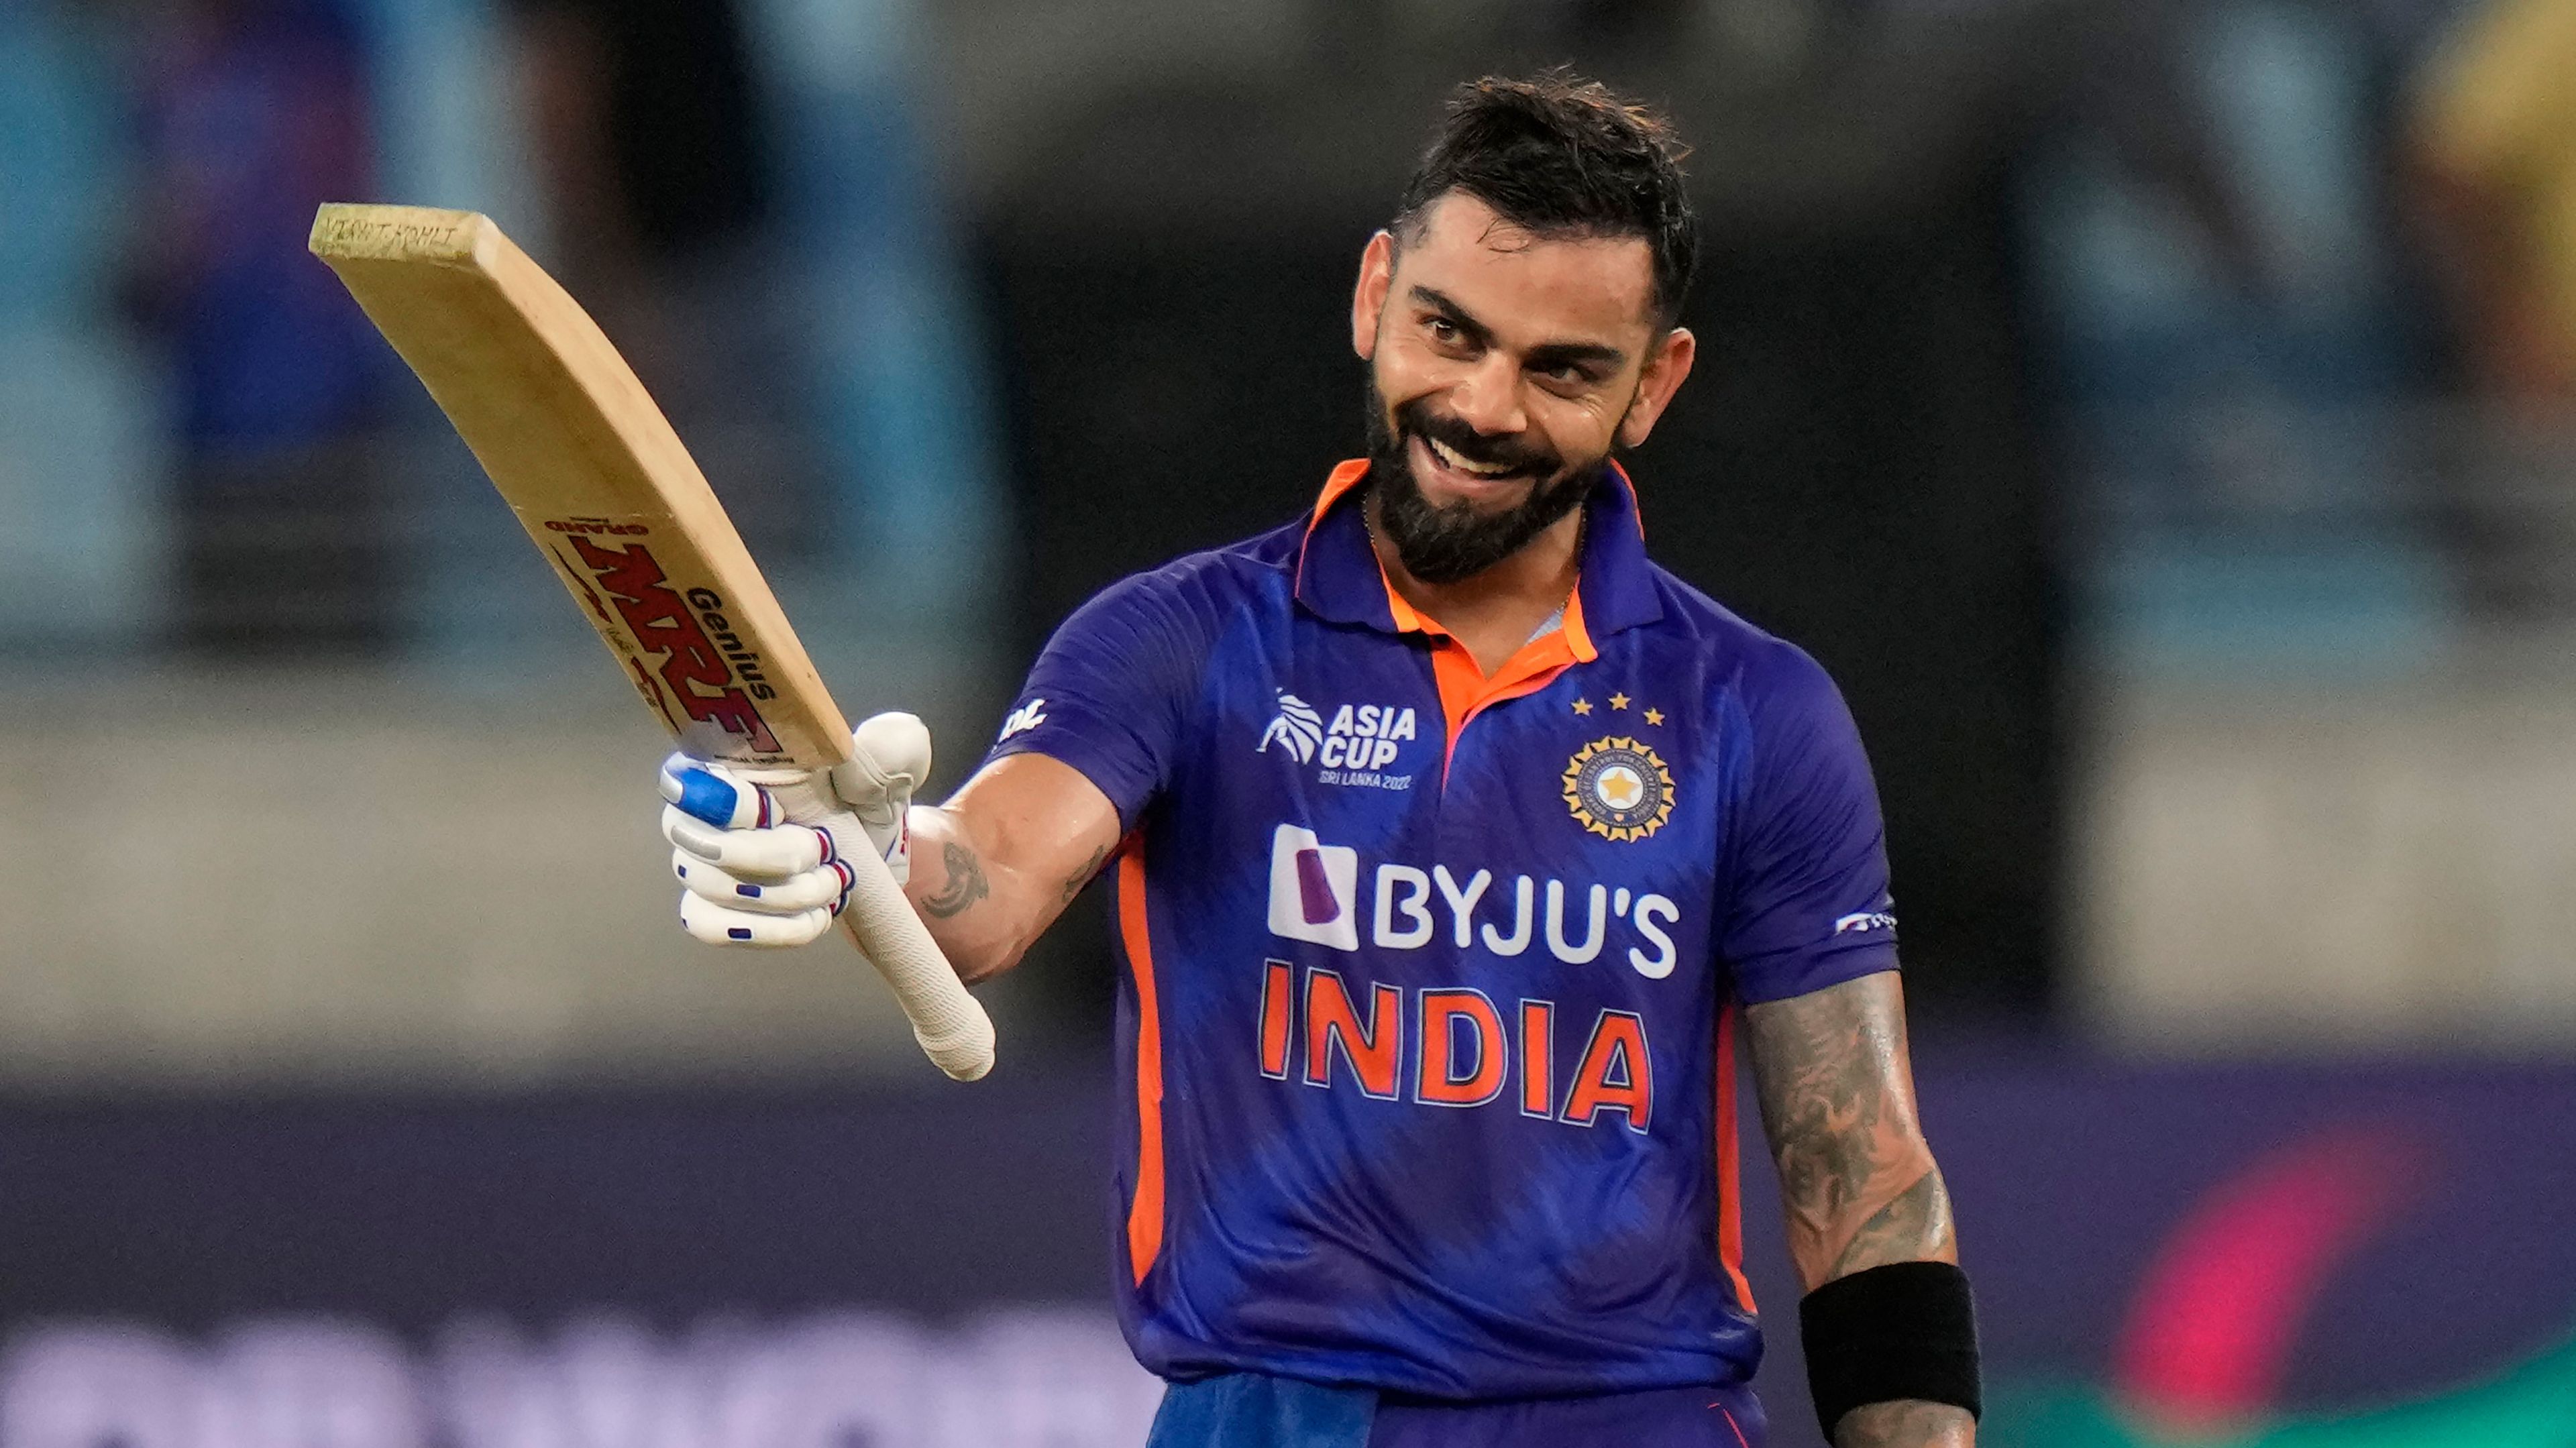 India&#x27;s Virat Kohli raises his bat to celebrate scoring a century during the T20 cricket match of Asia Cup between India and Afghanistan, in Dubai, United Arab Emirates, Thursday, Sept. 8, 2022. (AP Photo/Anjum Naveed)